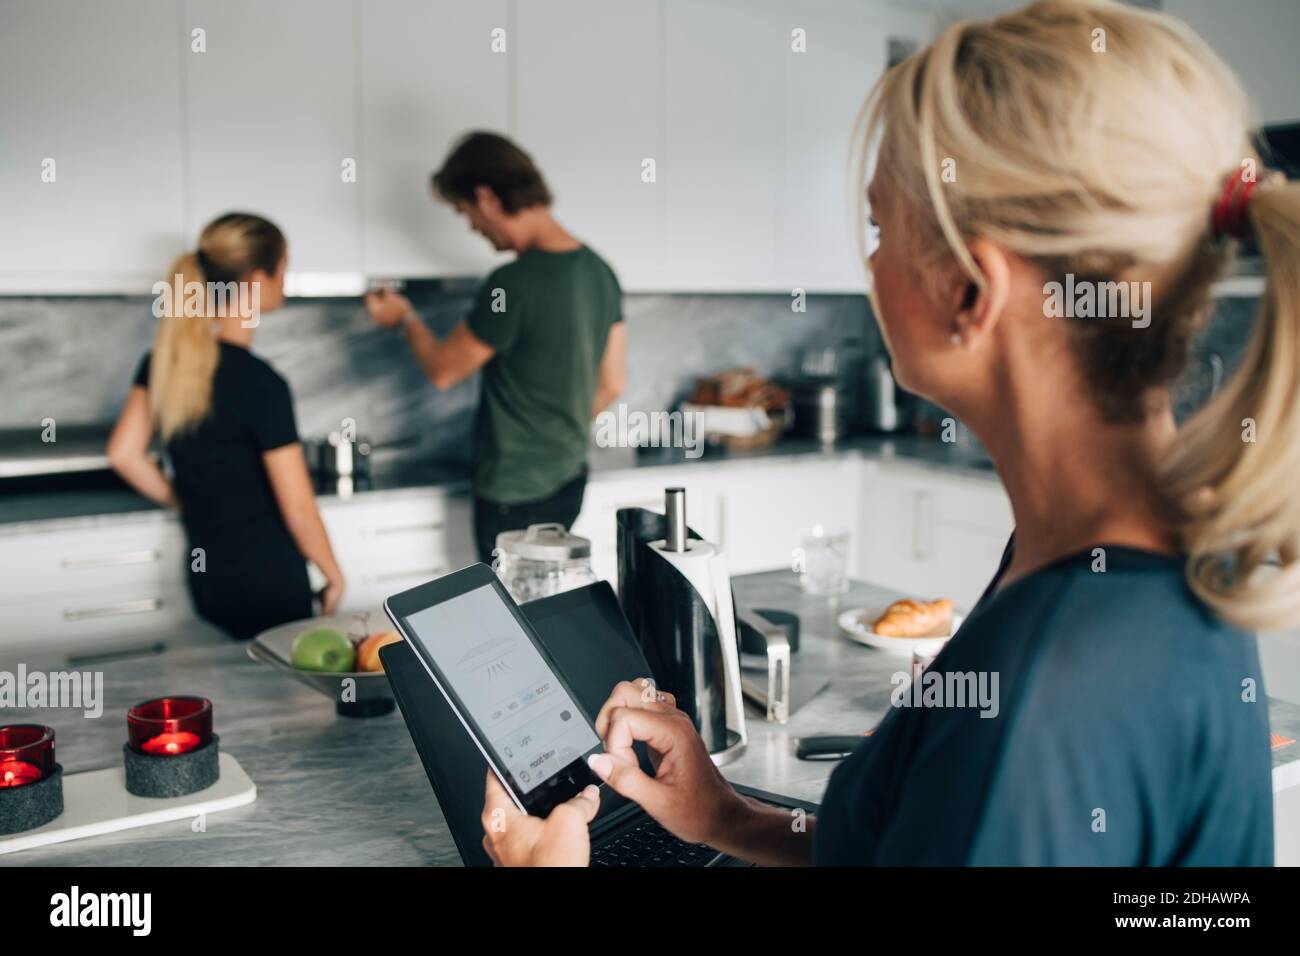 Mature woman with technologies looking at man and daughter standing in kitchen Stock Photo